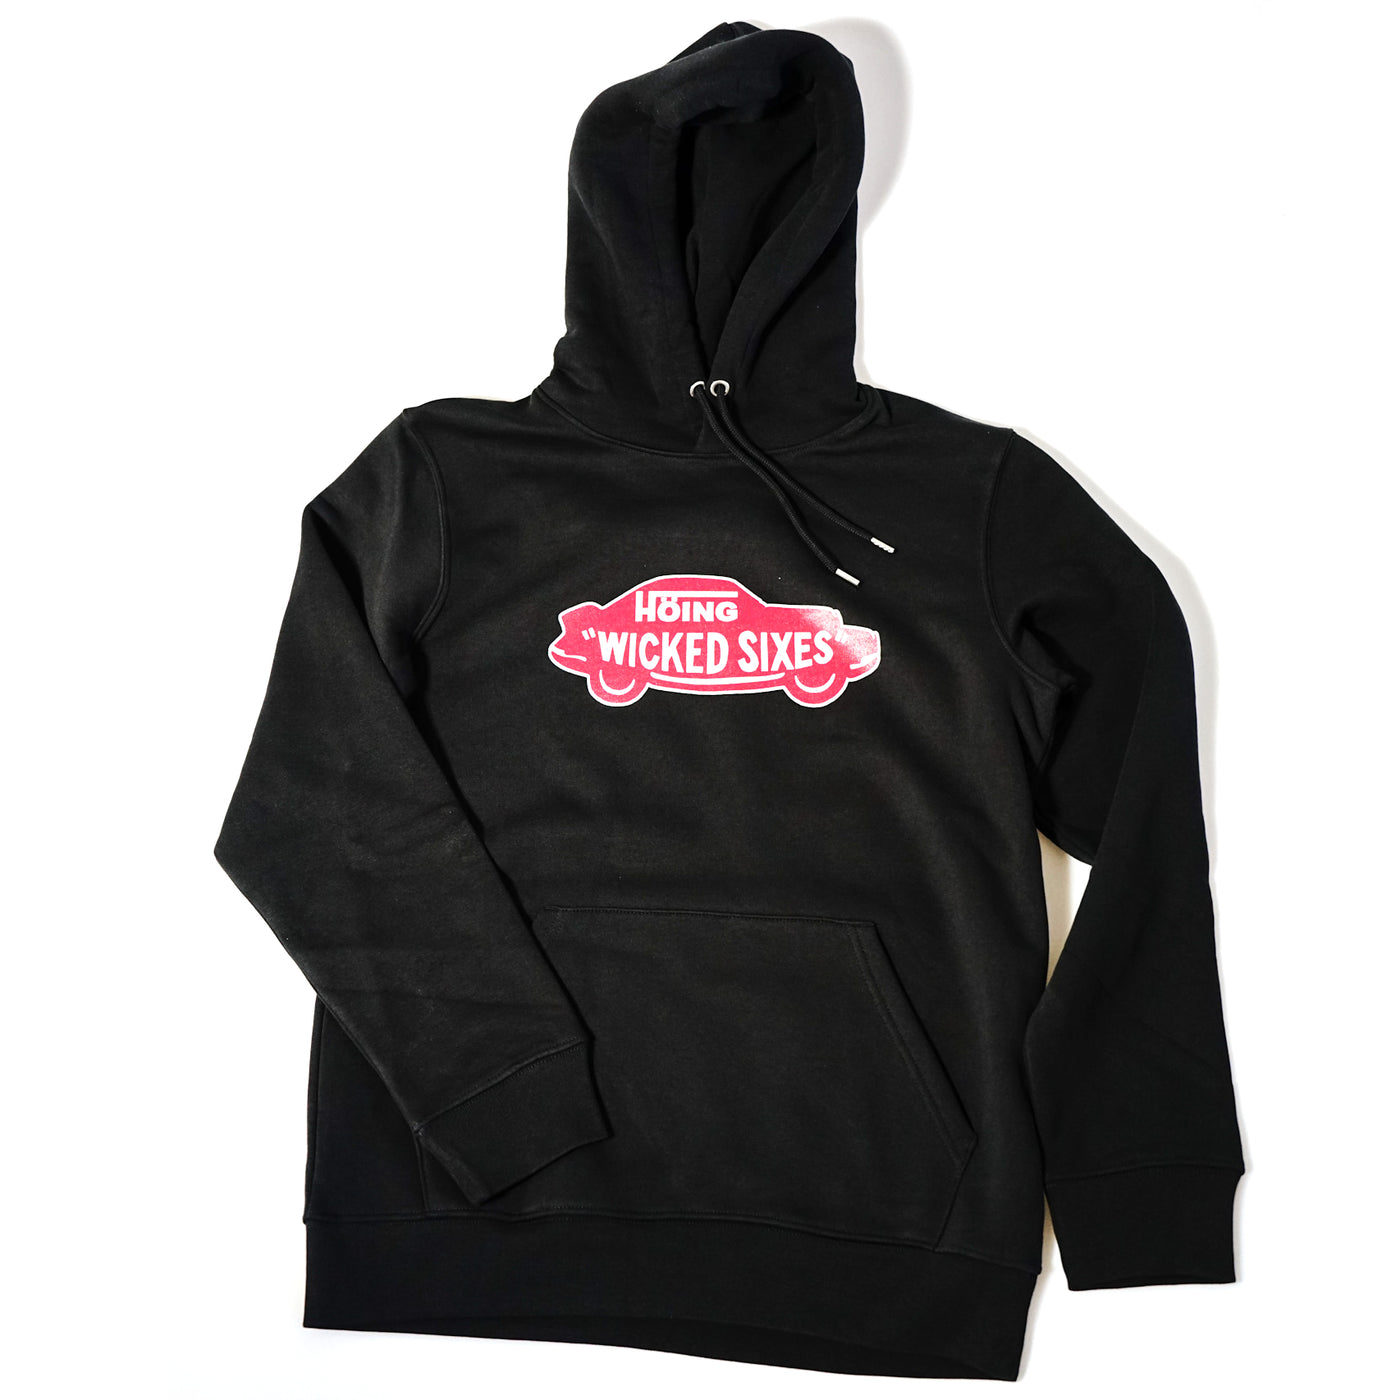 Höing Wicked Sixes "Off The Wall" Hoodie